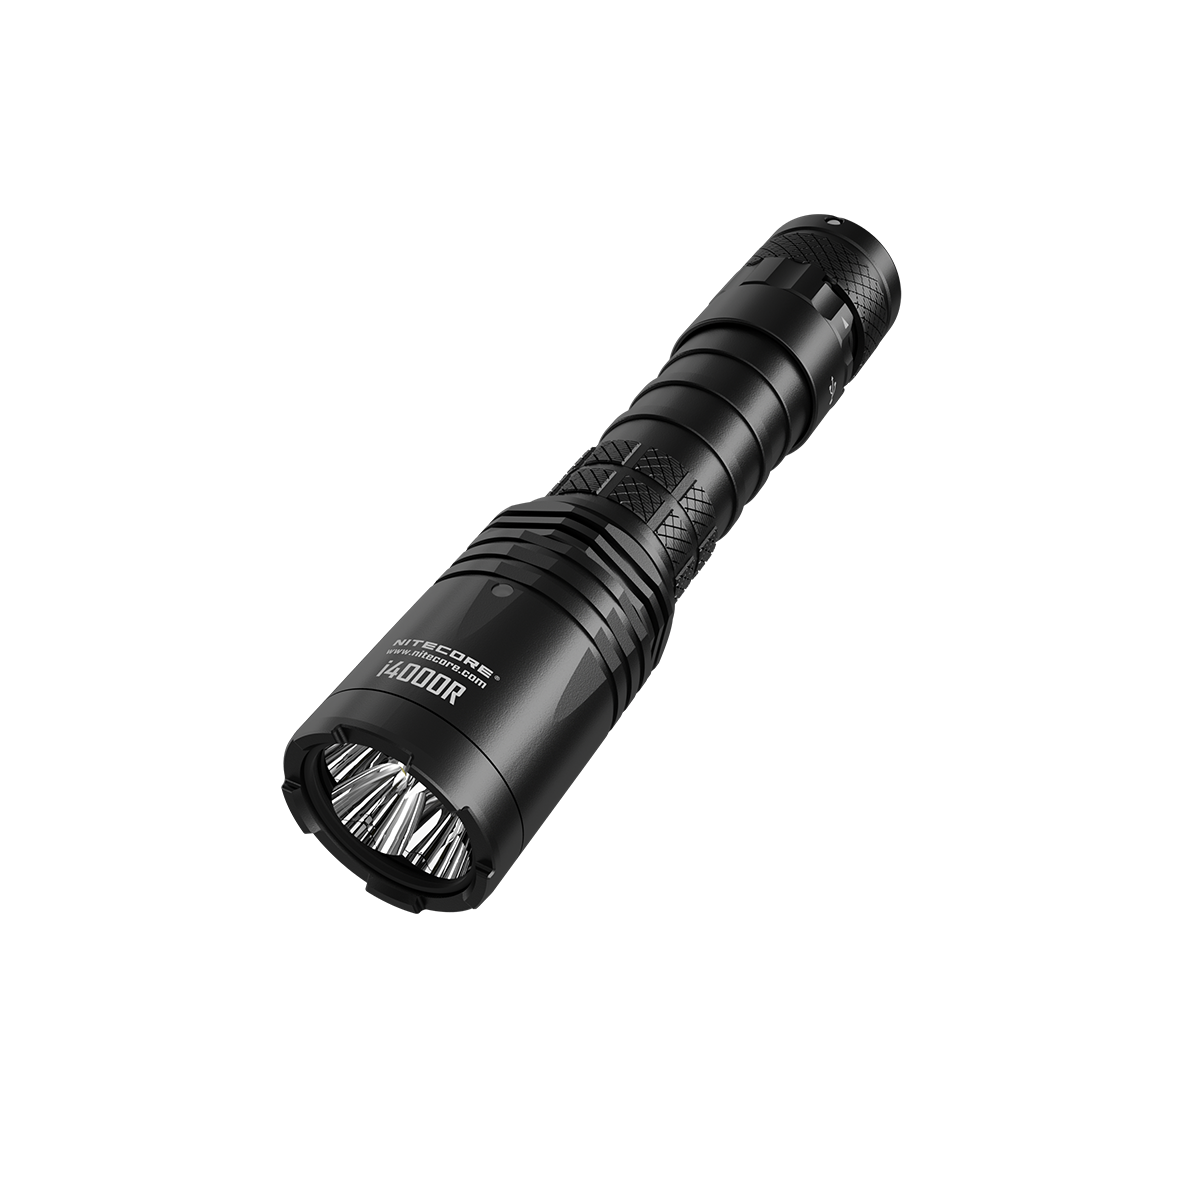 Nitecore P10iX Rechargeable LED Torch – Torch Direct Limited